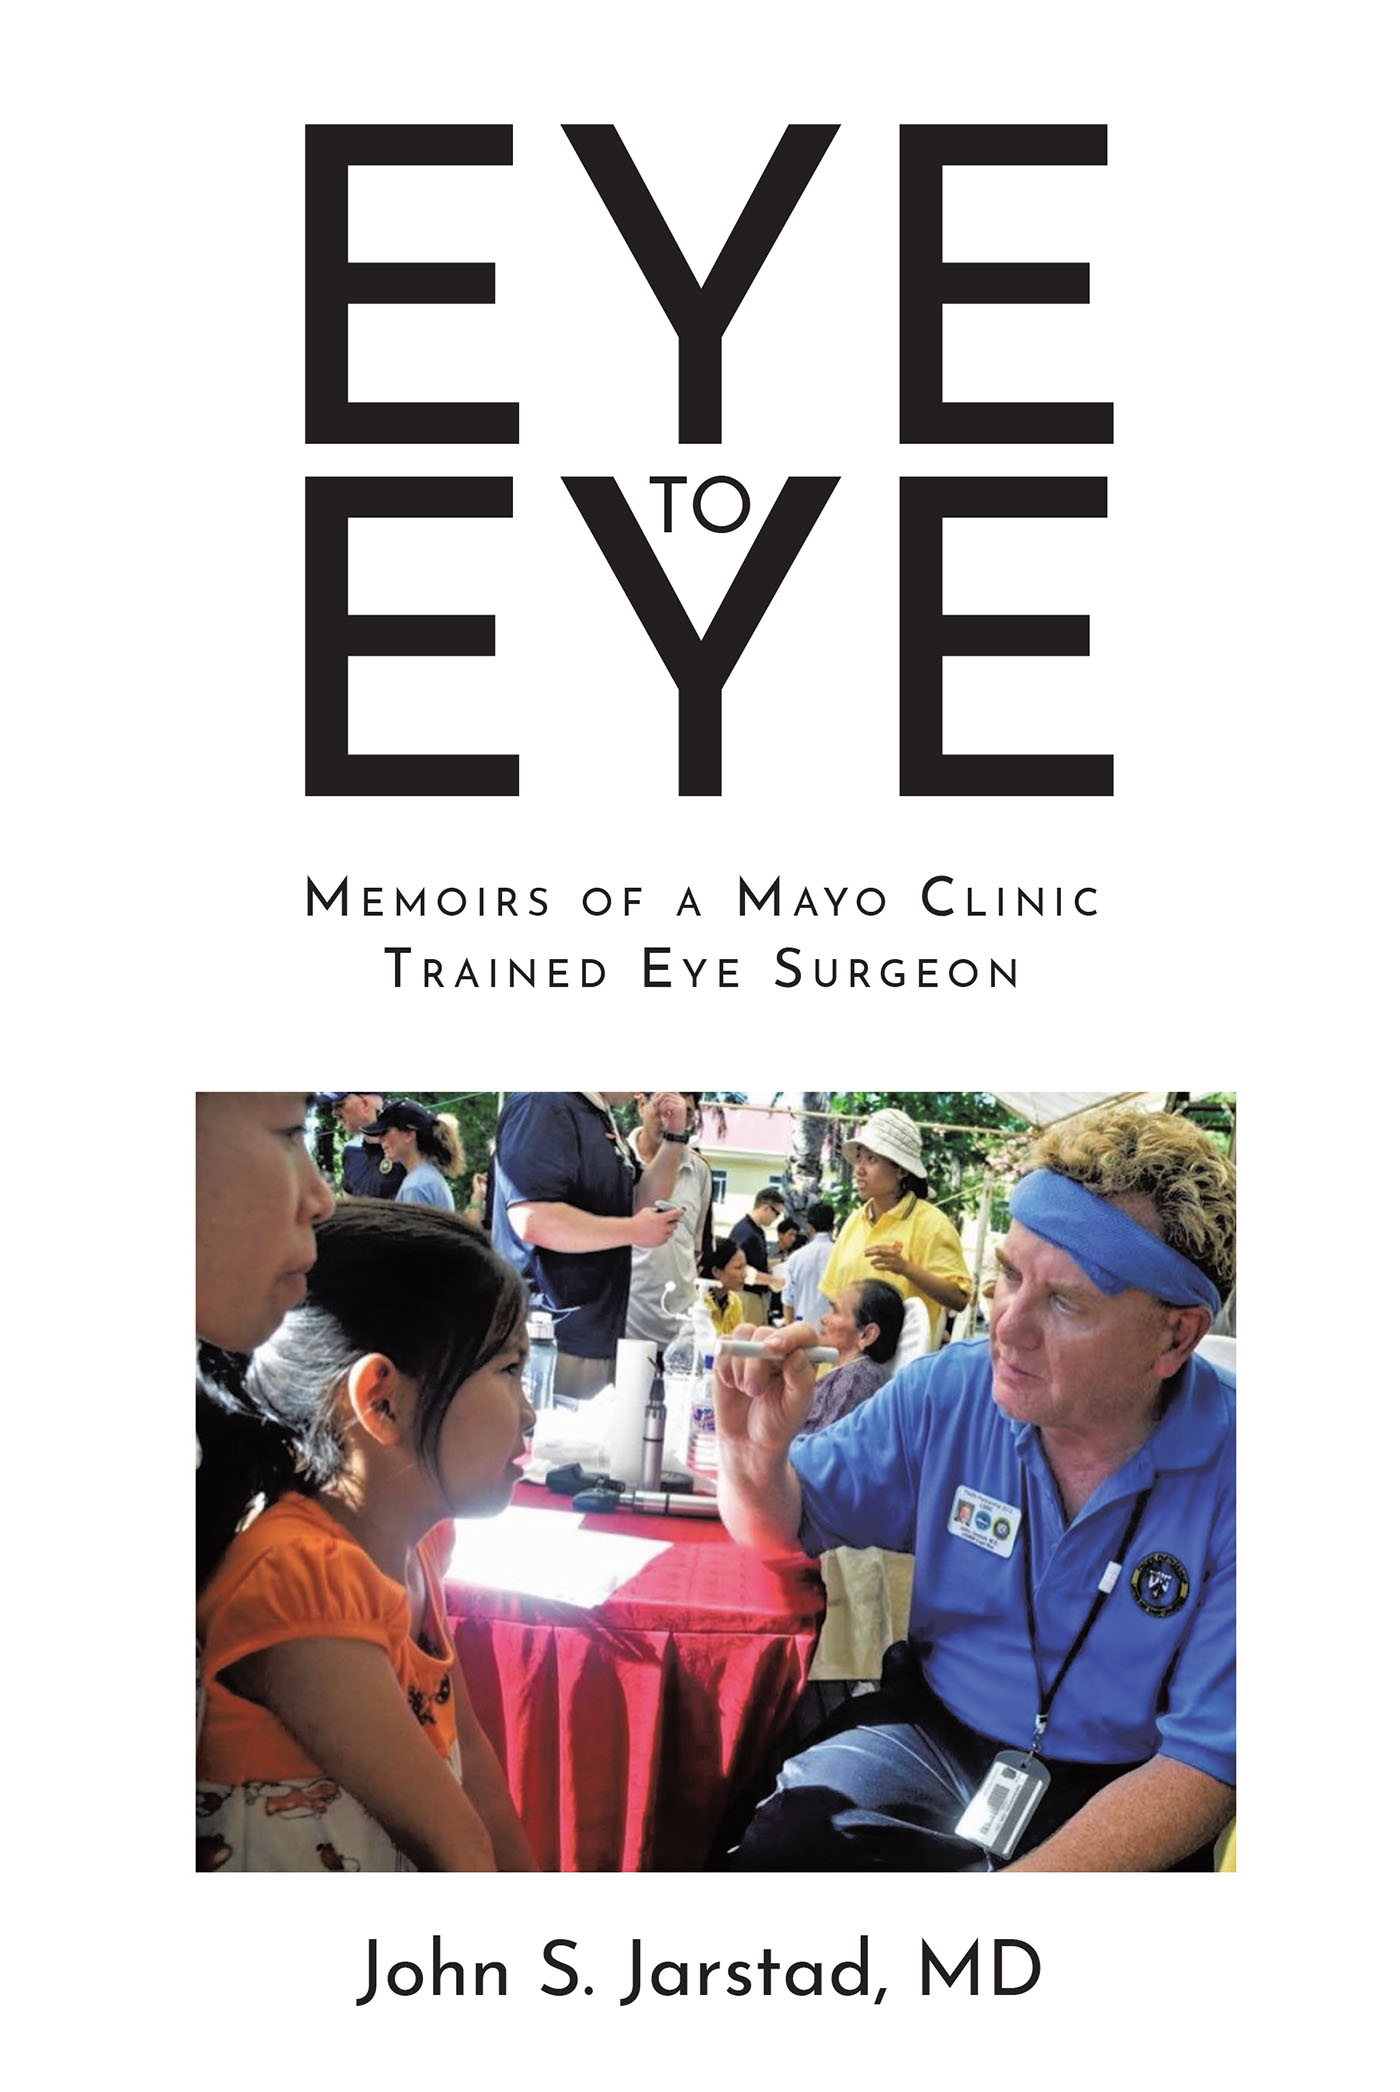 John S. Jarstad, MD’s Newly Released "Eye to Eye: Memoirs of a Mayo Clinic-Trained Eye Surgeon" is a Fascinating Look Into a Life of Unexpected Challenges and Triumphs